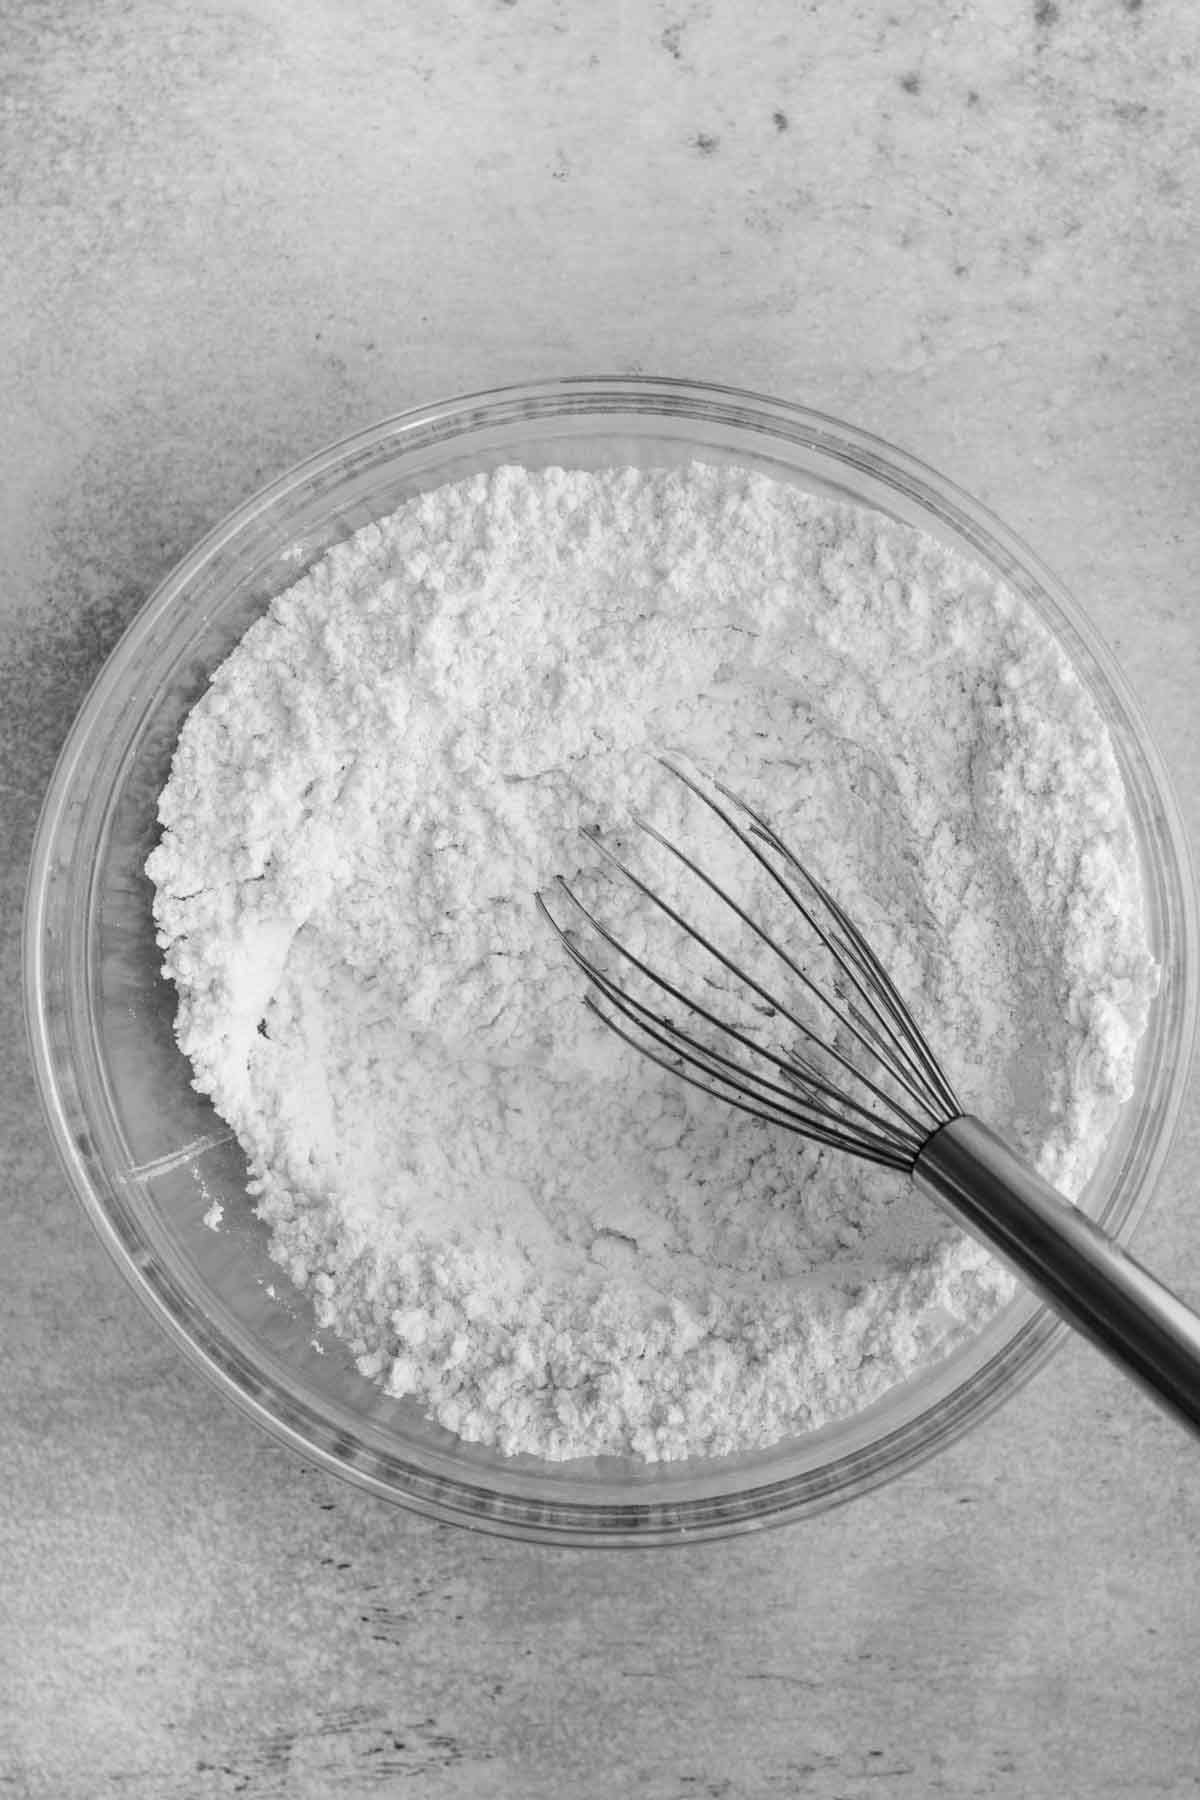 A glass bowl whisking the dry ingredients.